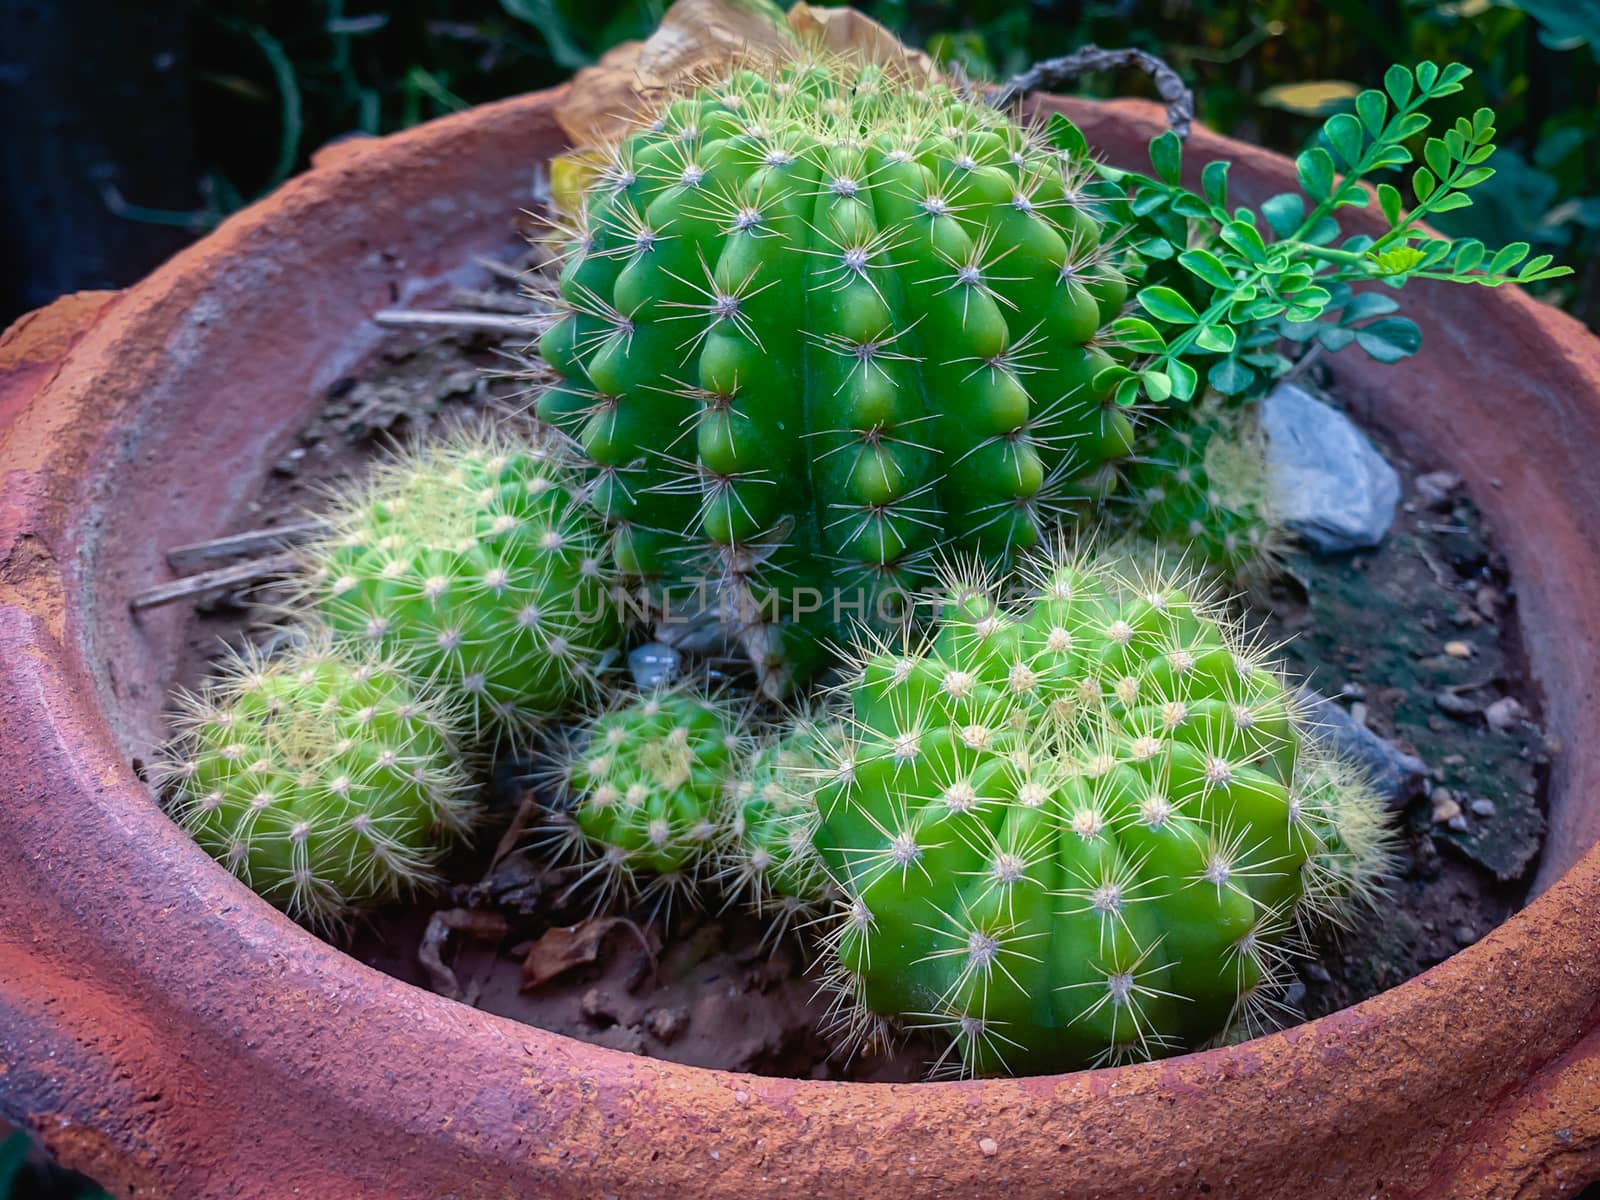 Many cactus trees in pots